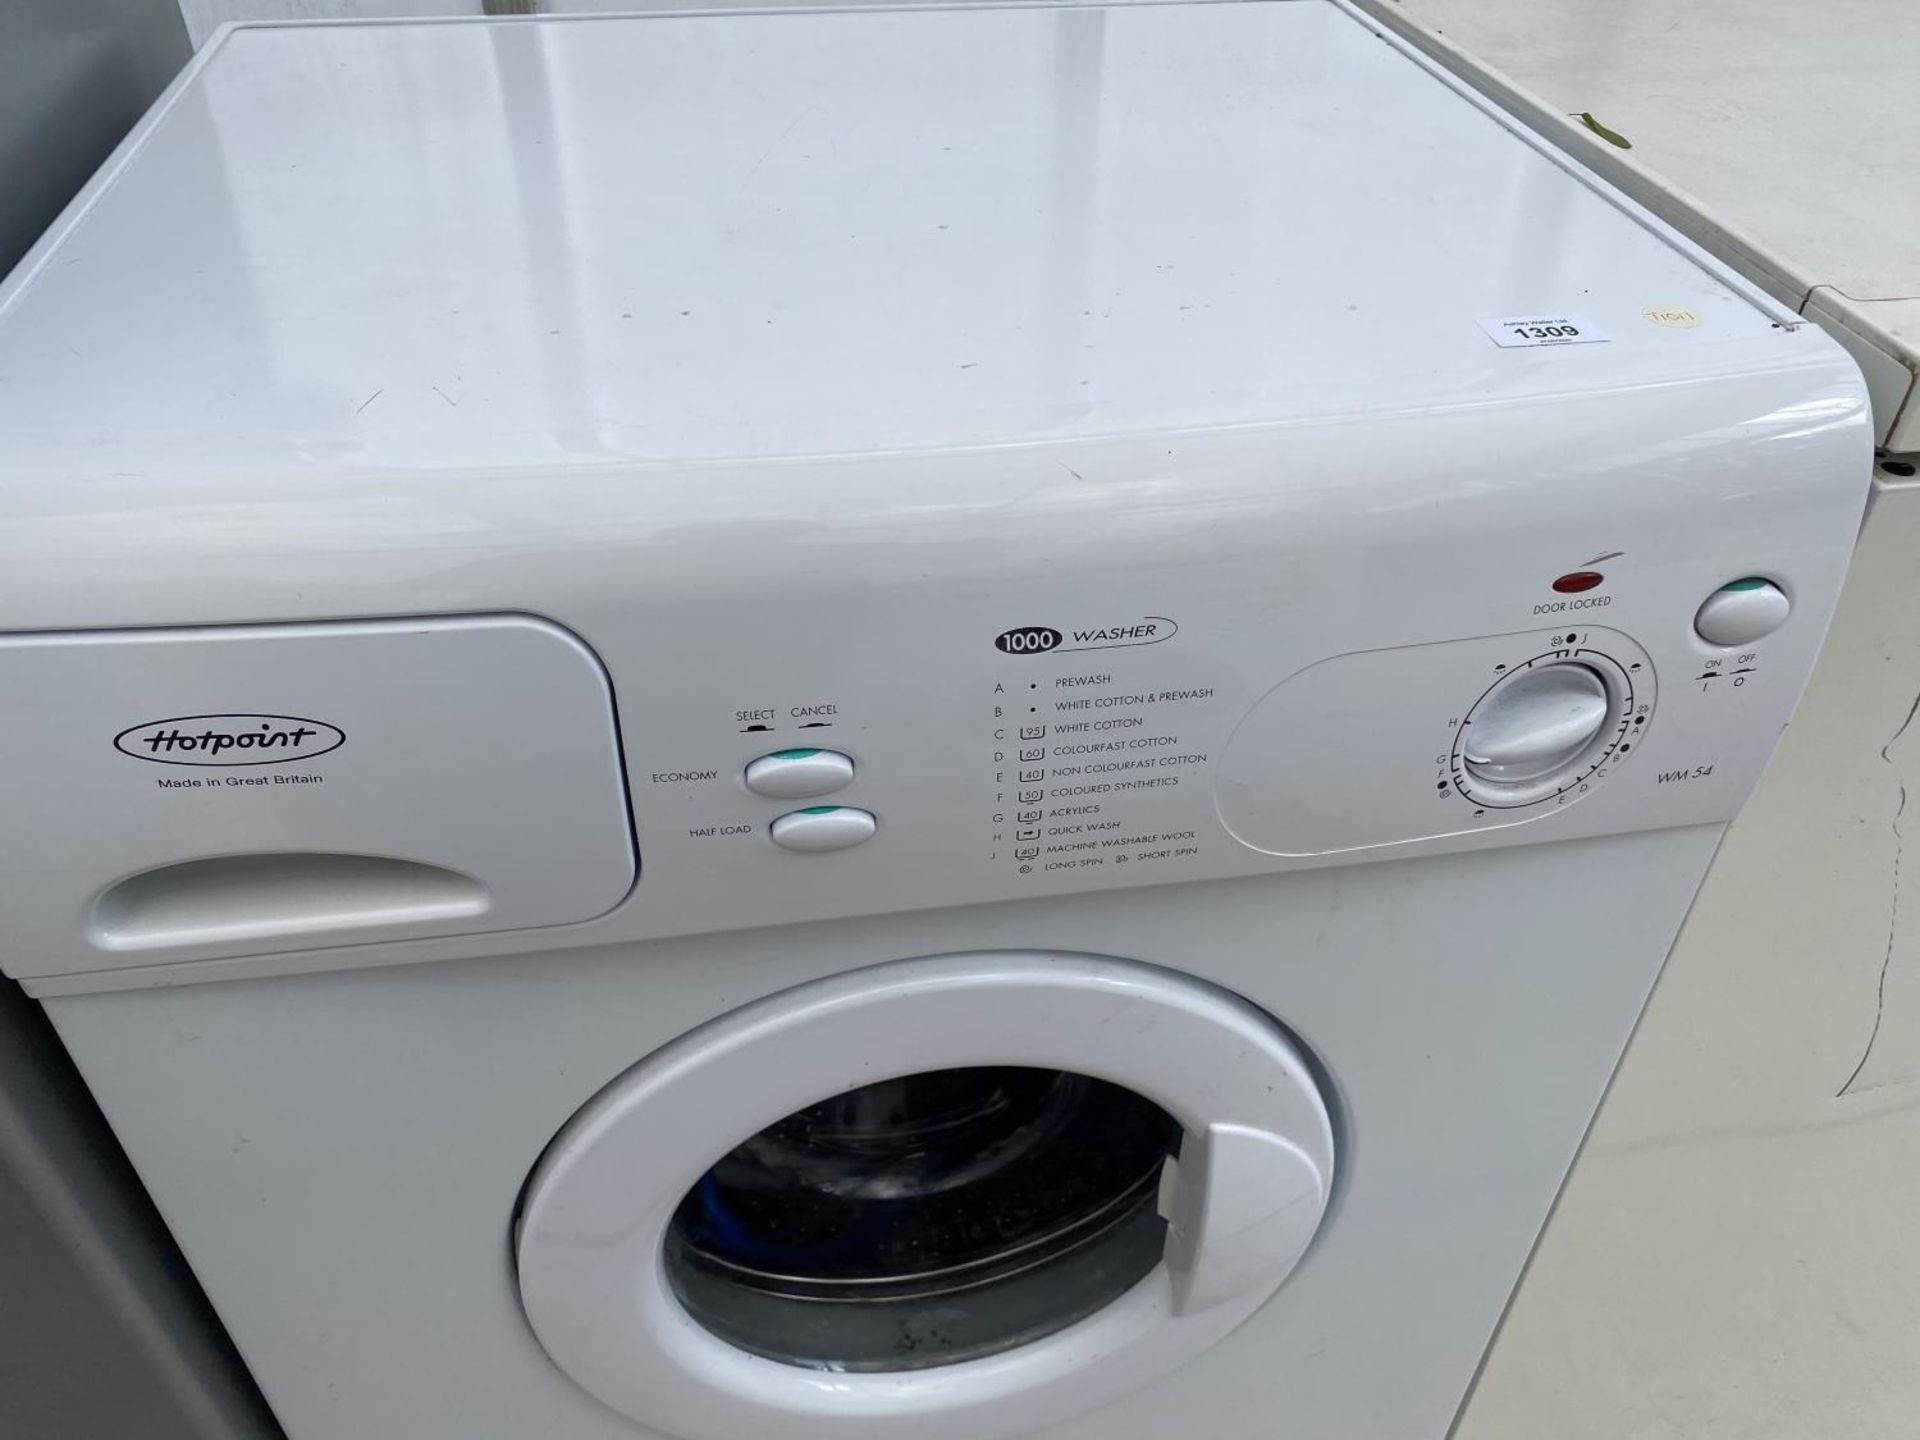 A HOTPOINT WM54 WASHING MACHINE IN CLEAN AND WORKING ORDER - Image 2 of 2